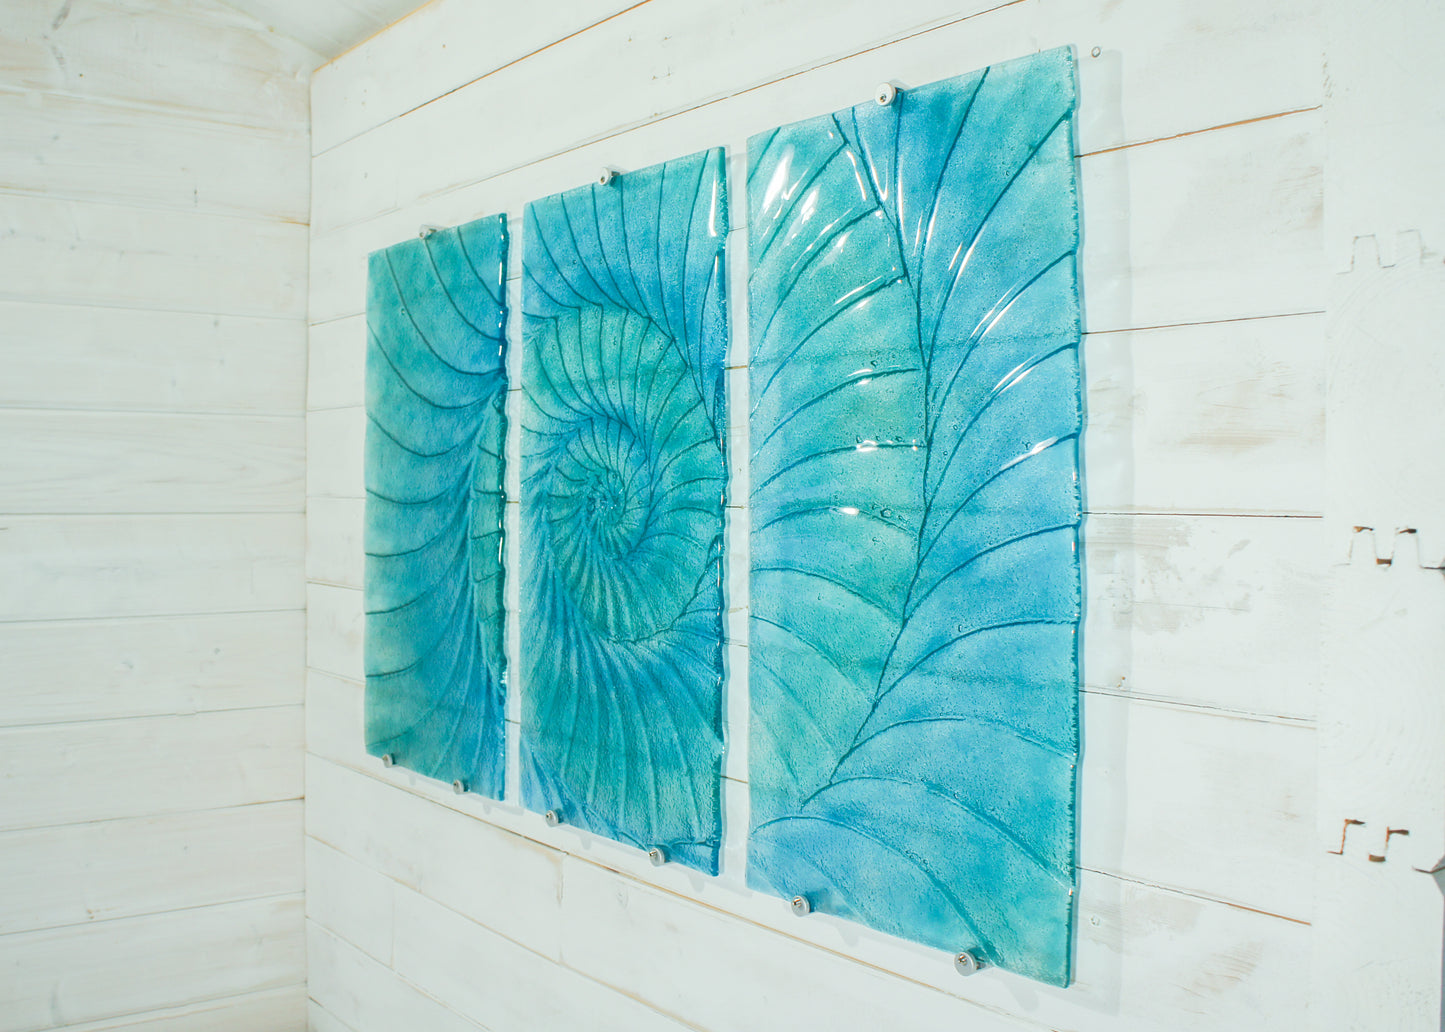 Triptych Ammonite Panels OVERALL 100x60cm (40x23") incl. gaps and 9 fixings - Blue/Turquoise - Each Panel 30x60cm (12x23") Large Portrait Fossil Fused Glass Wall Art